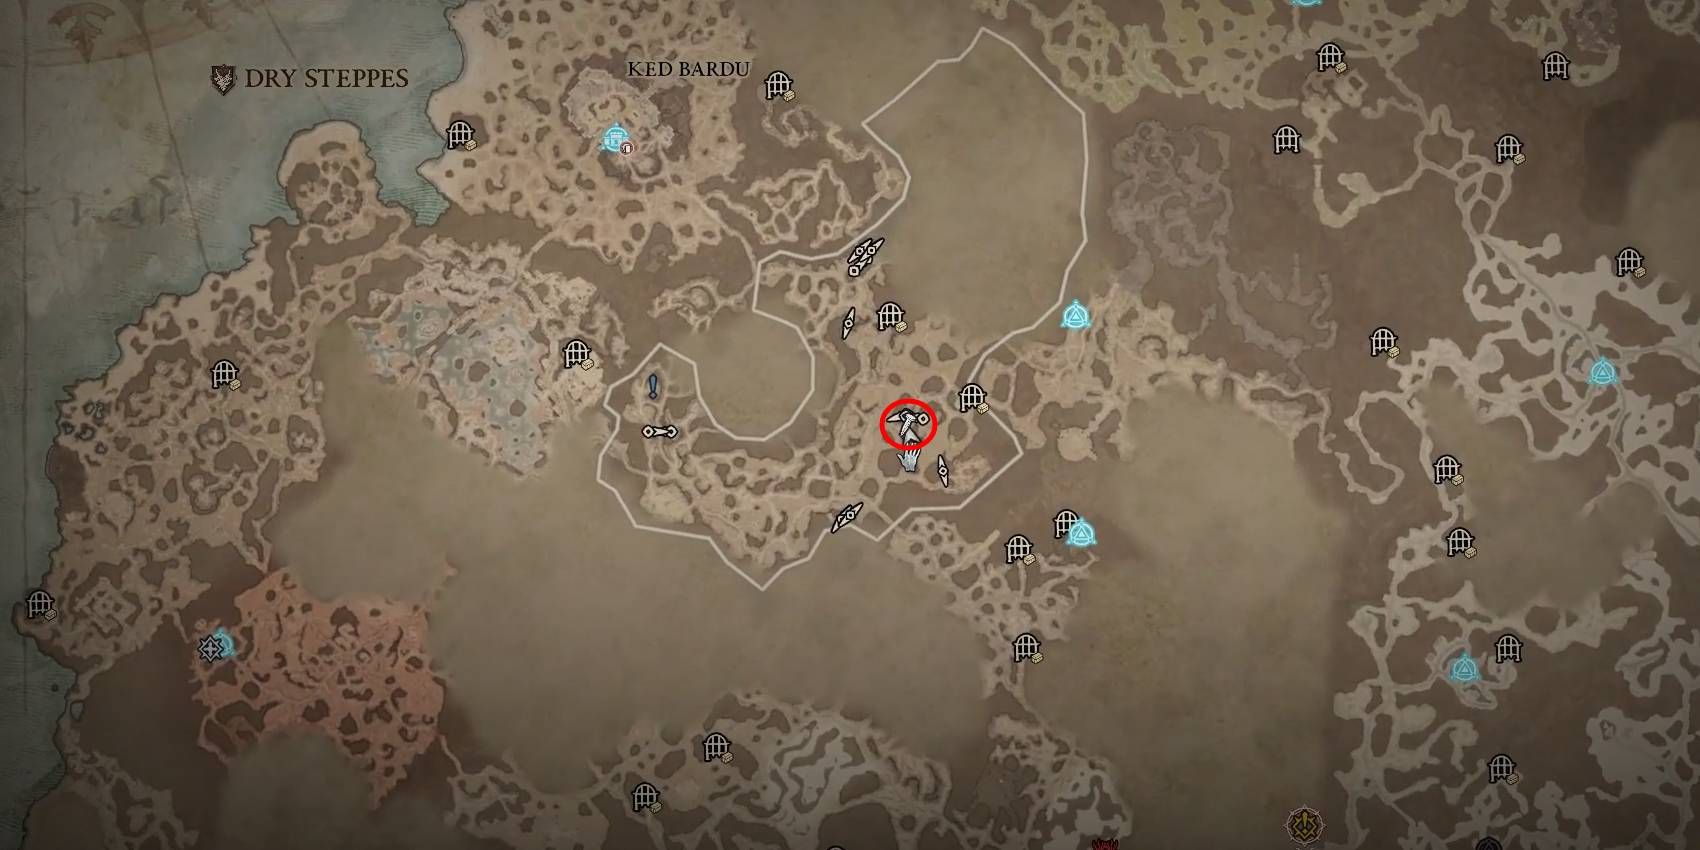 Diablo 4 Bhotak the Inevitable Rare Elite Location Marked in Red on Map